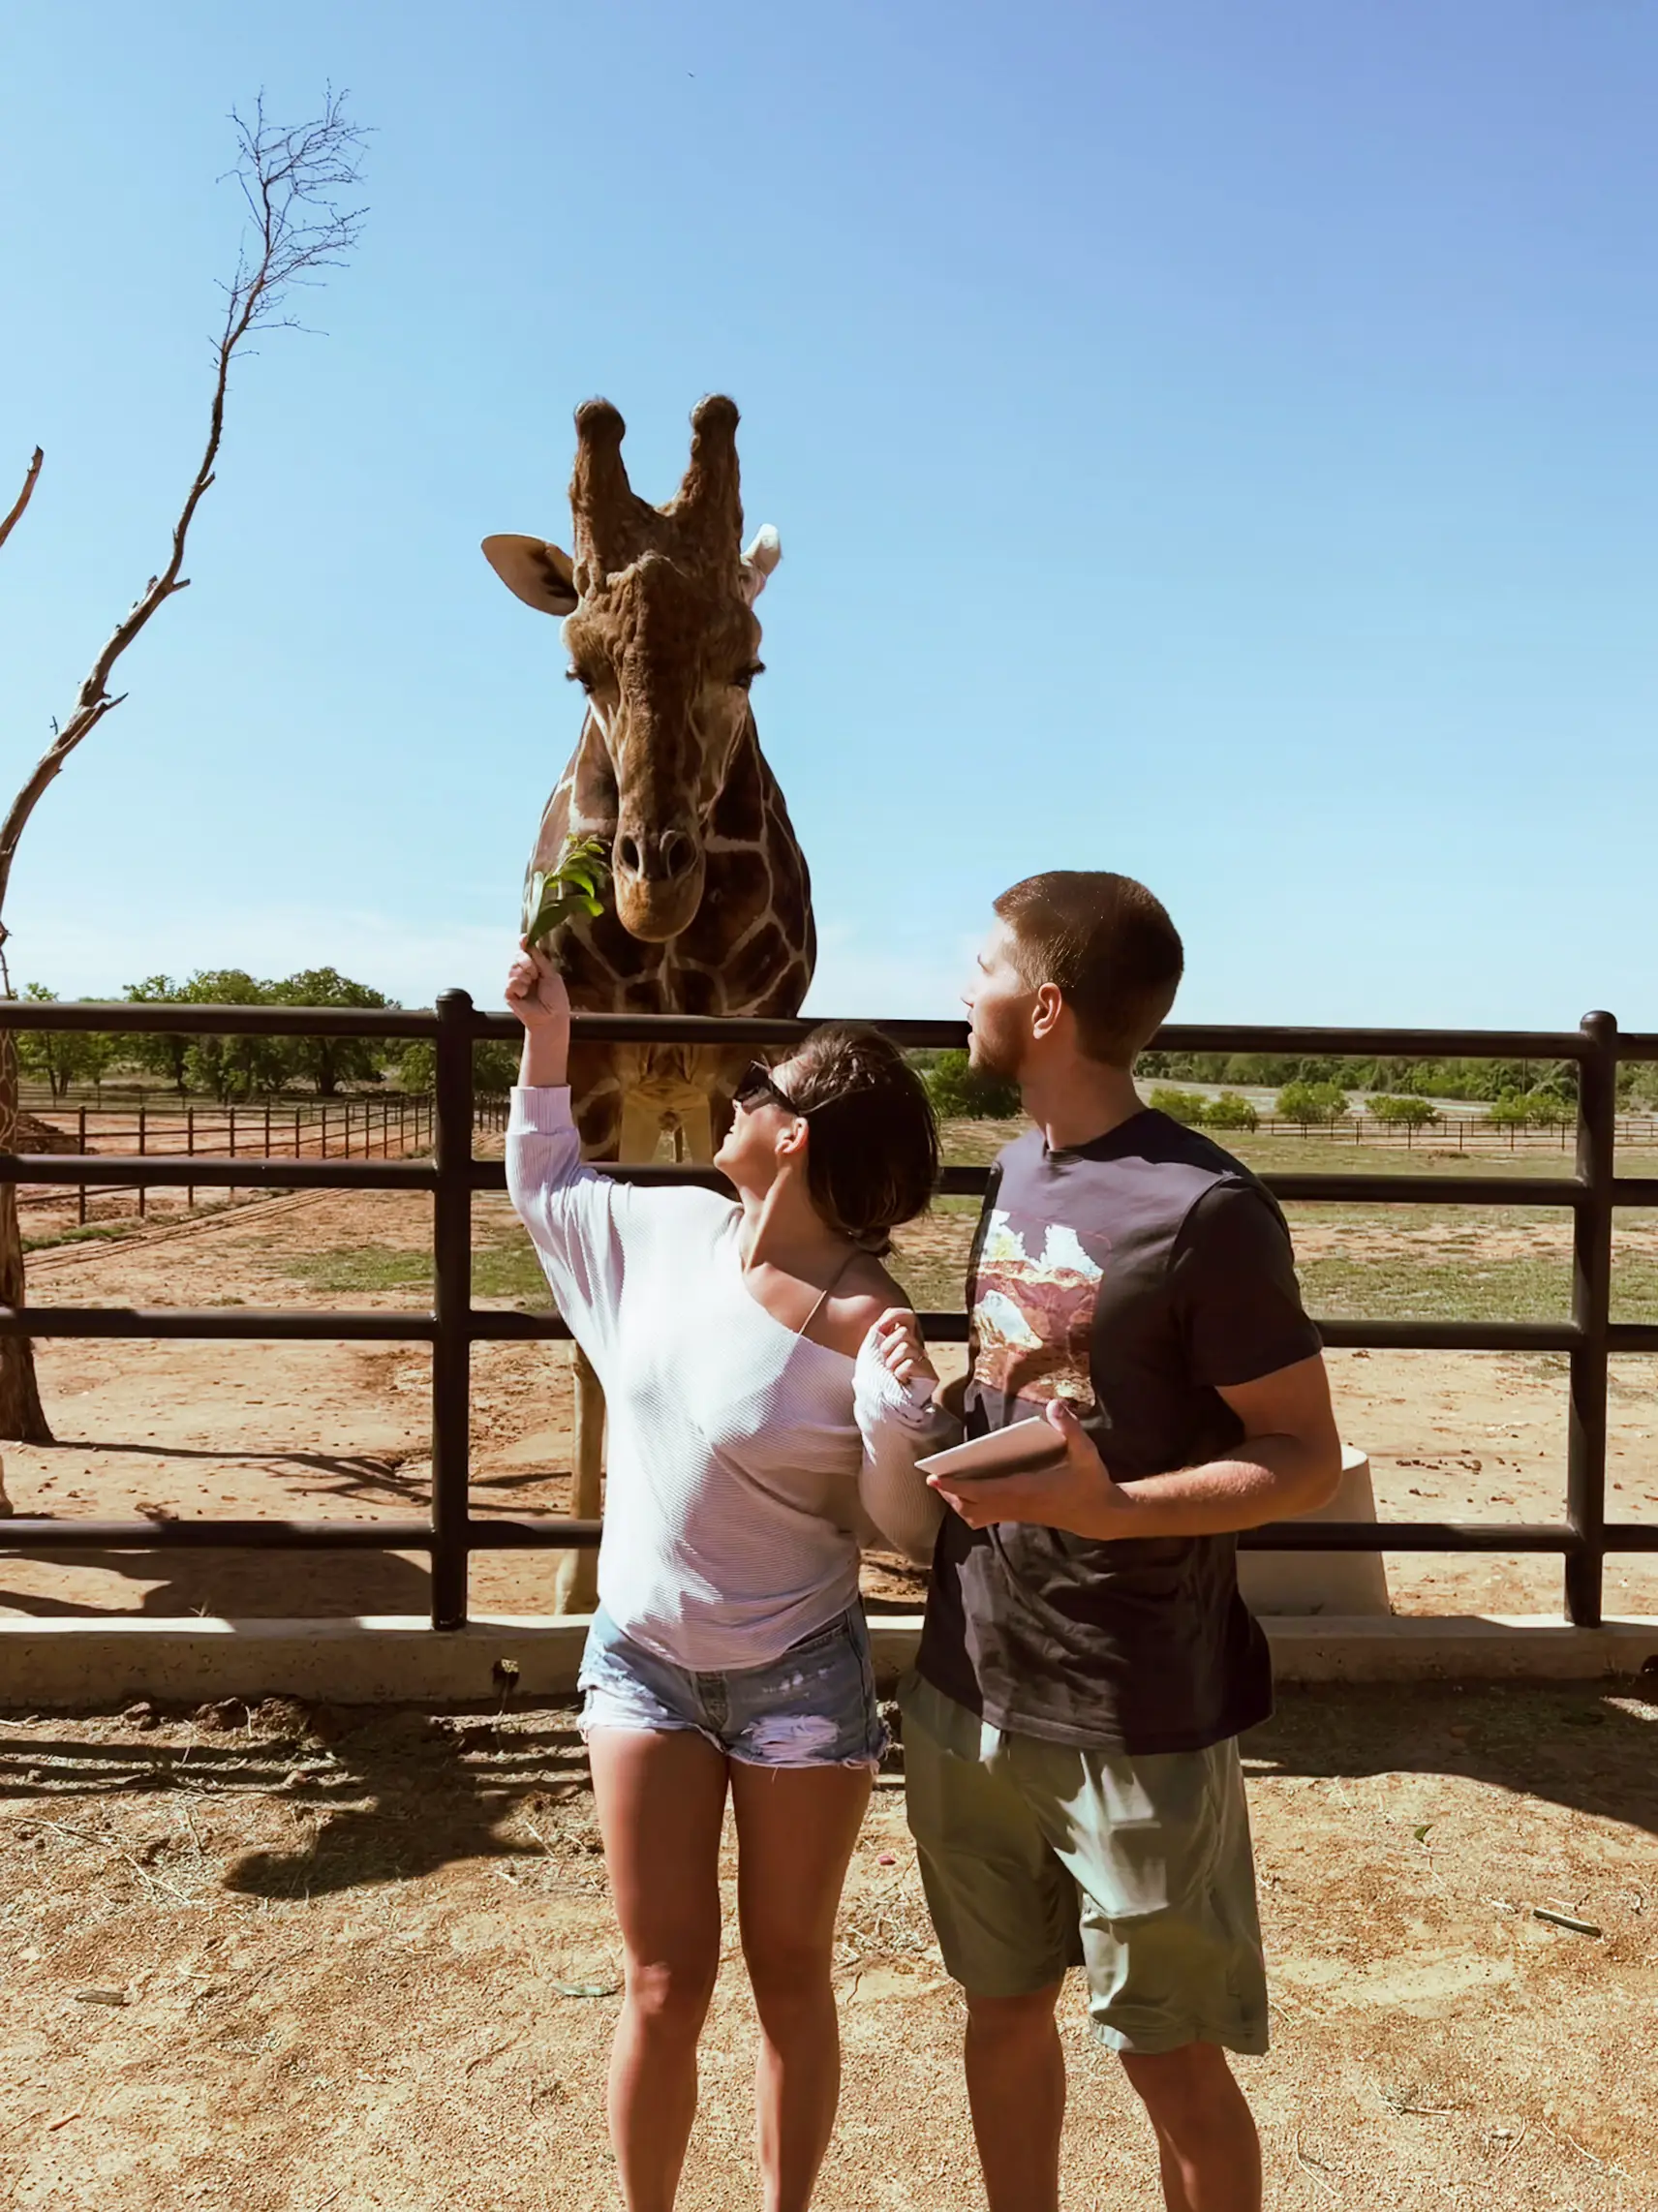  Two people are standing next to a giraffe.